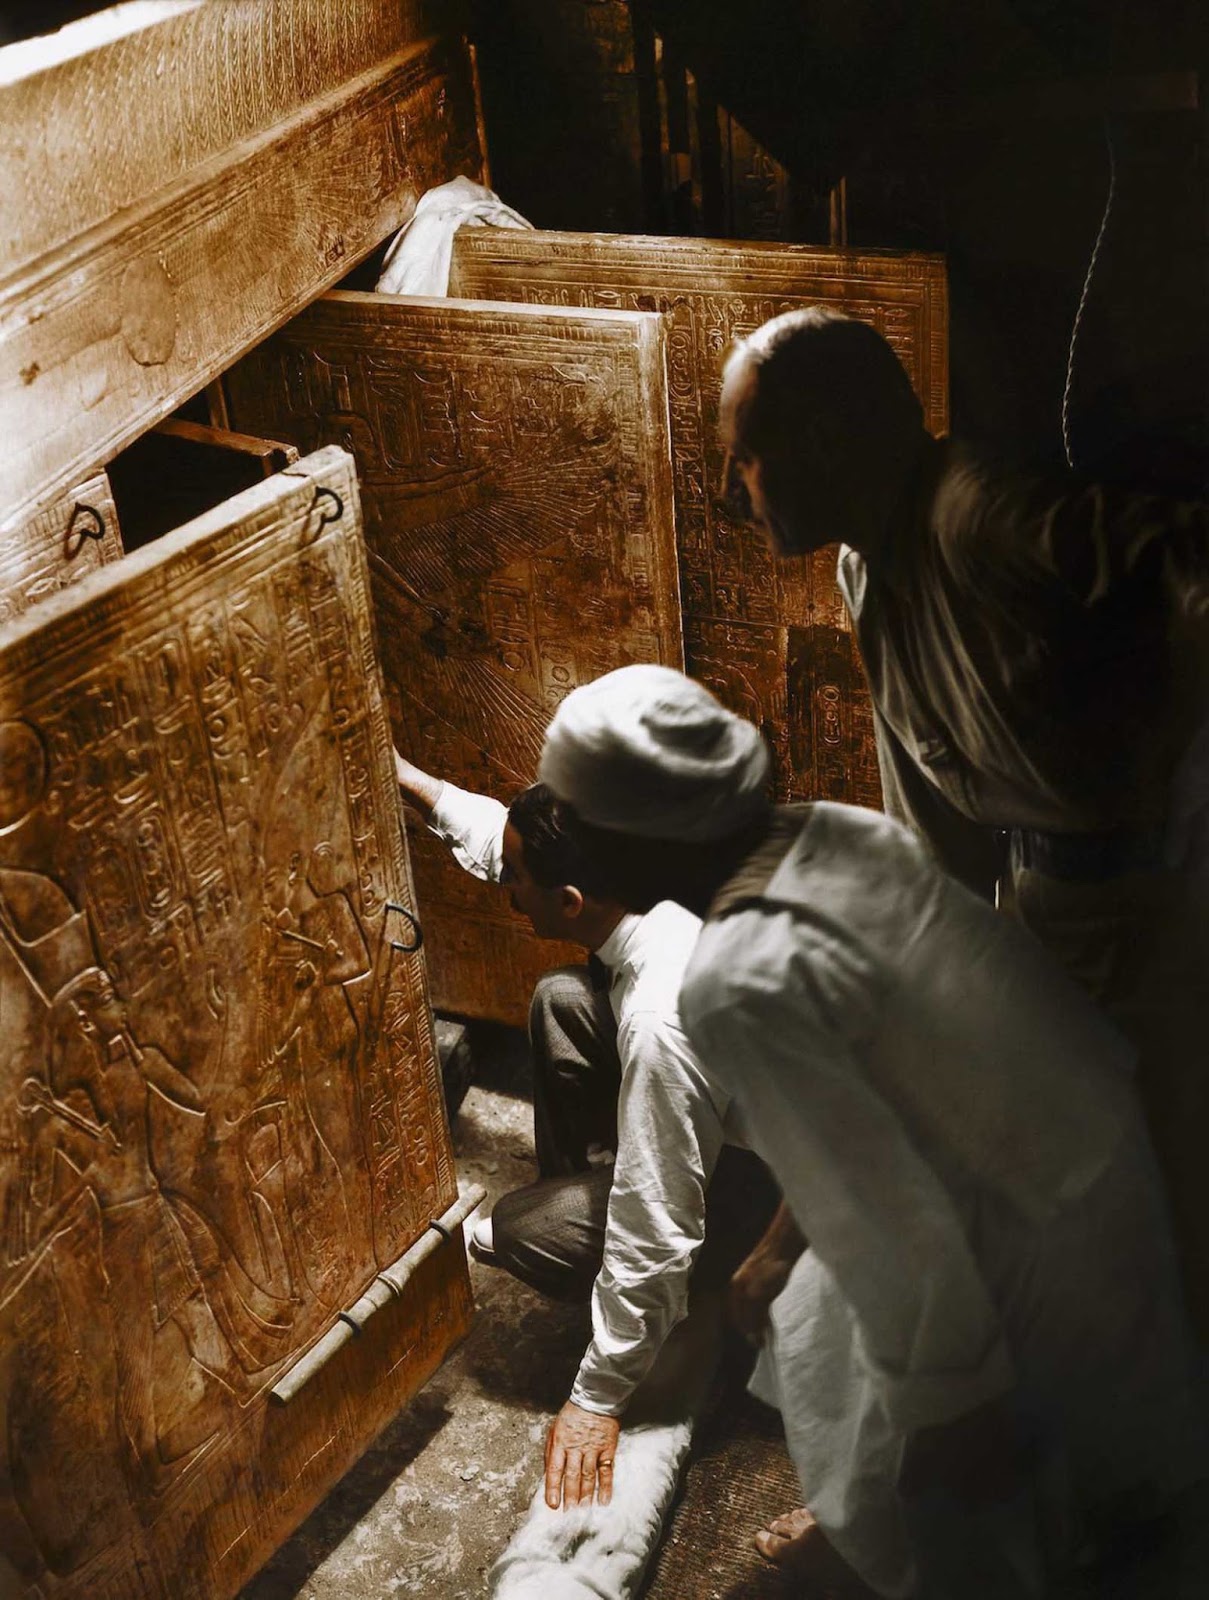 Howard Carter, Arthur Callender and an Egyptian worker open the doors of the innermost shrine and get their first look at Tutankhamun's sarcophagus.